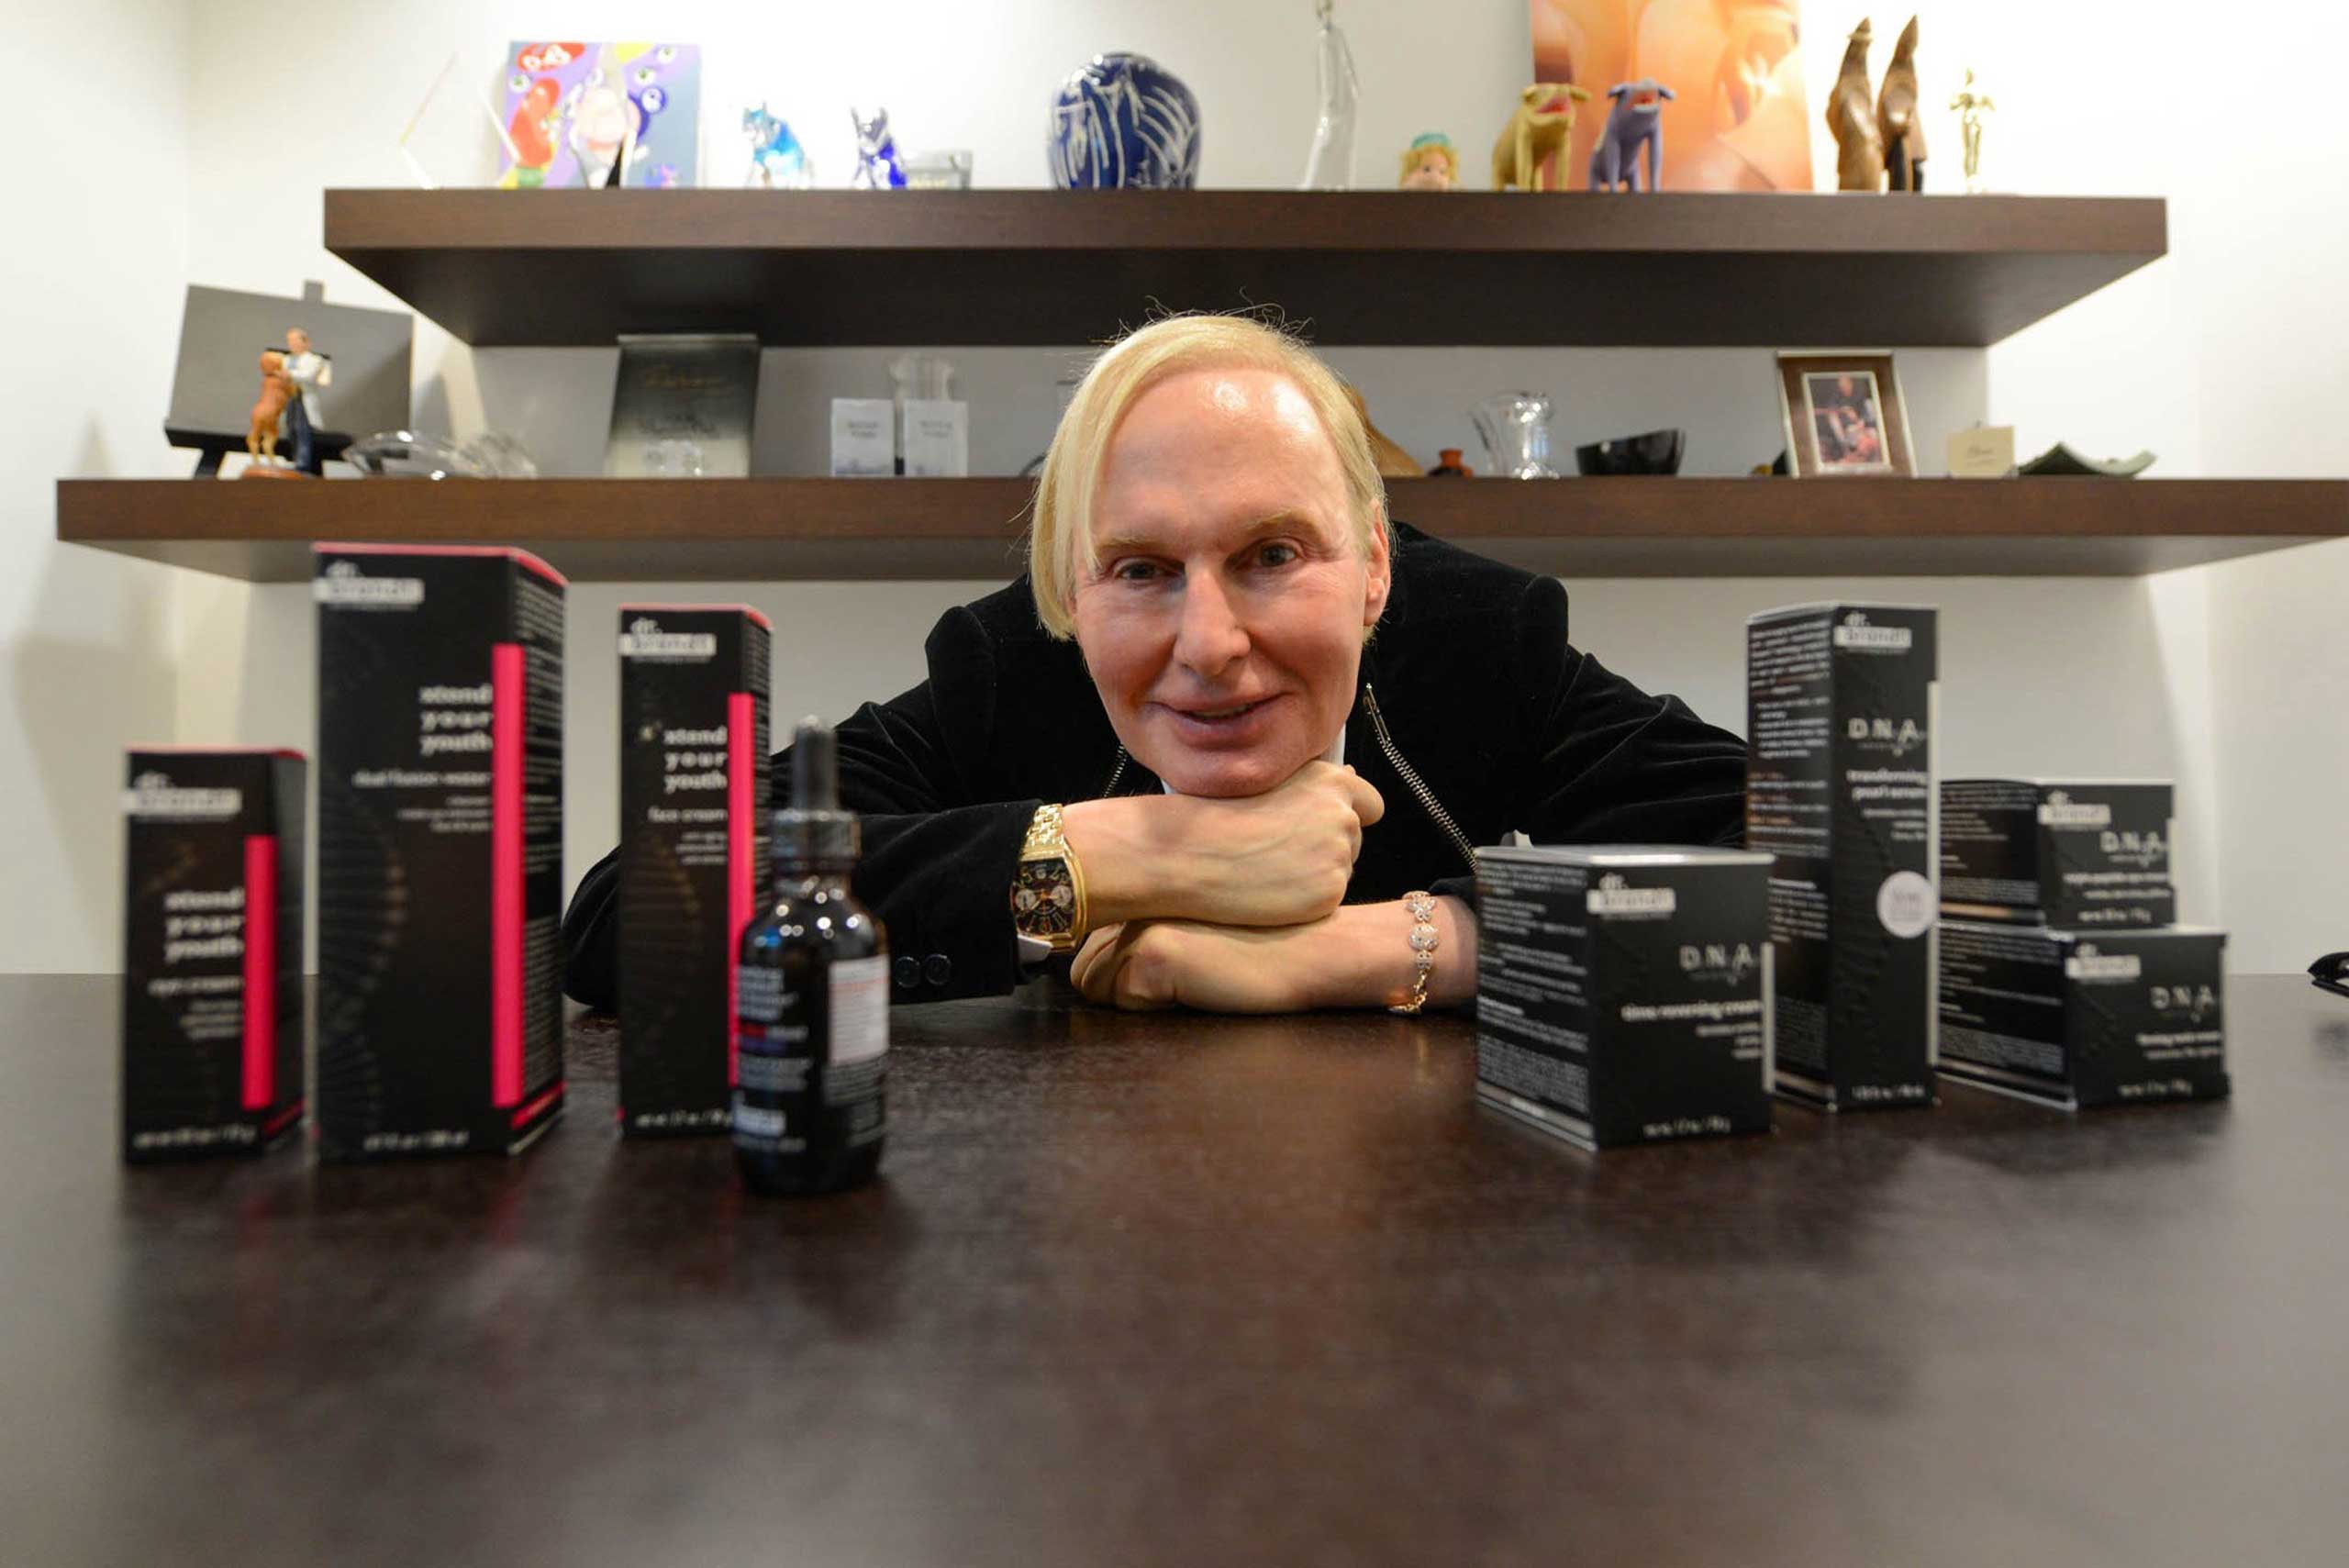 Dermatologist Dr. Fredric Brandt poses for a portrait with his newest additions to his skin-care line, Nov. 19, 2013, in Miami. (Shannon Kaestle—MCT/Getty Images)